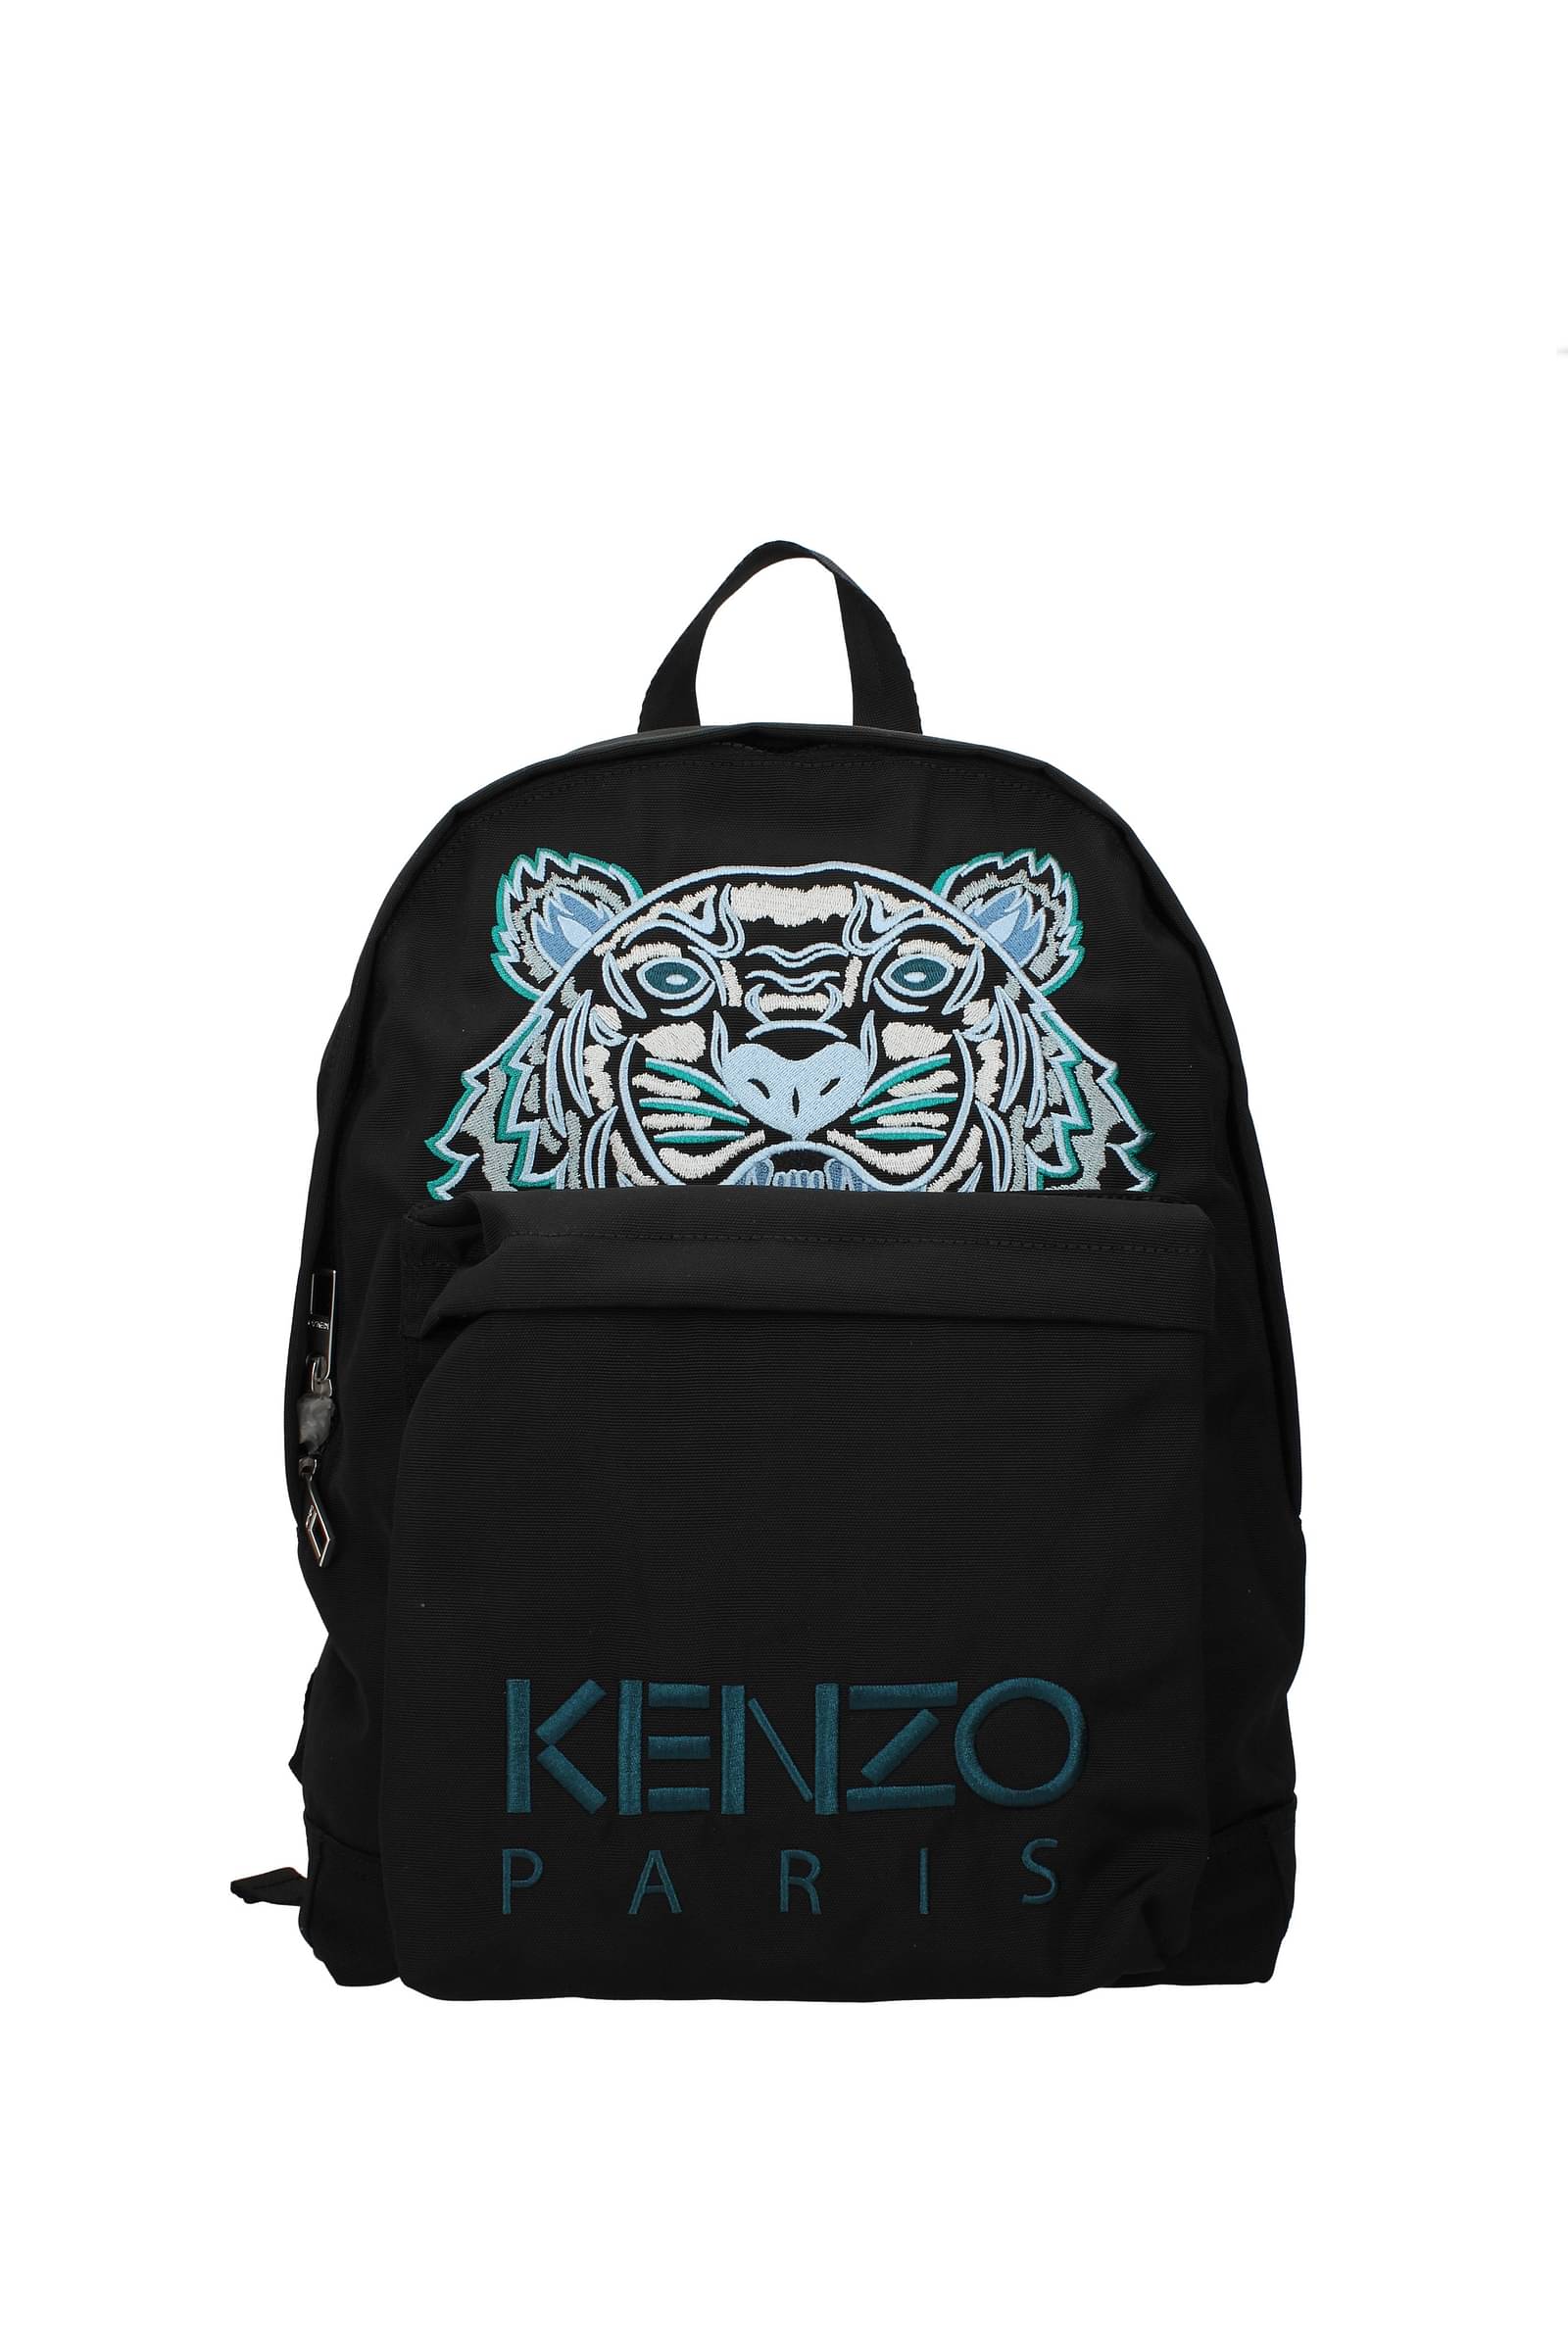 kenzo outlet online usa